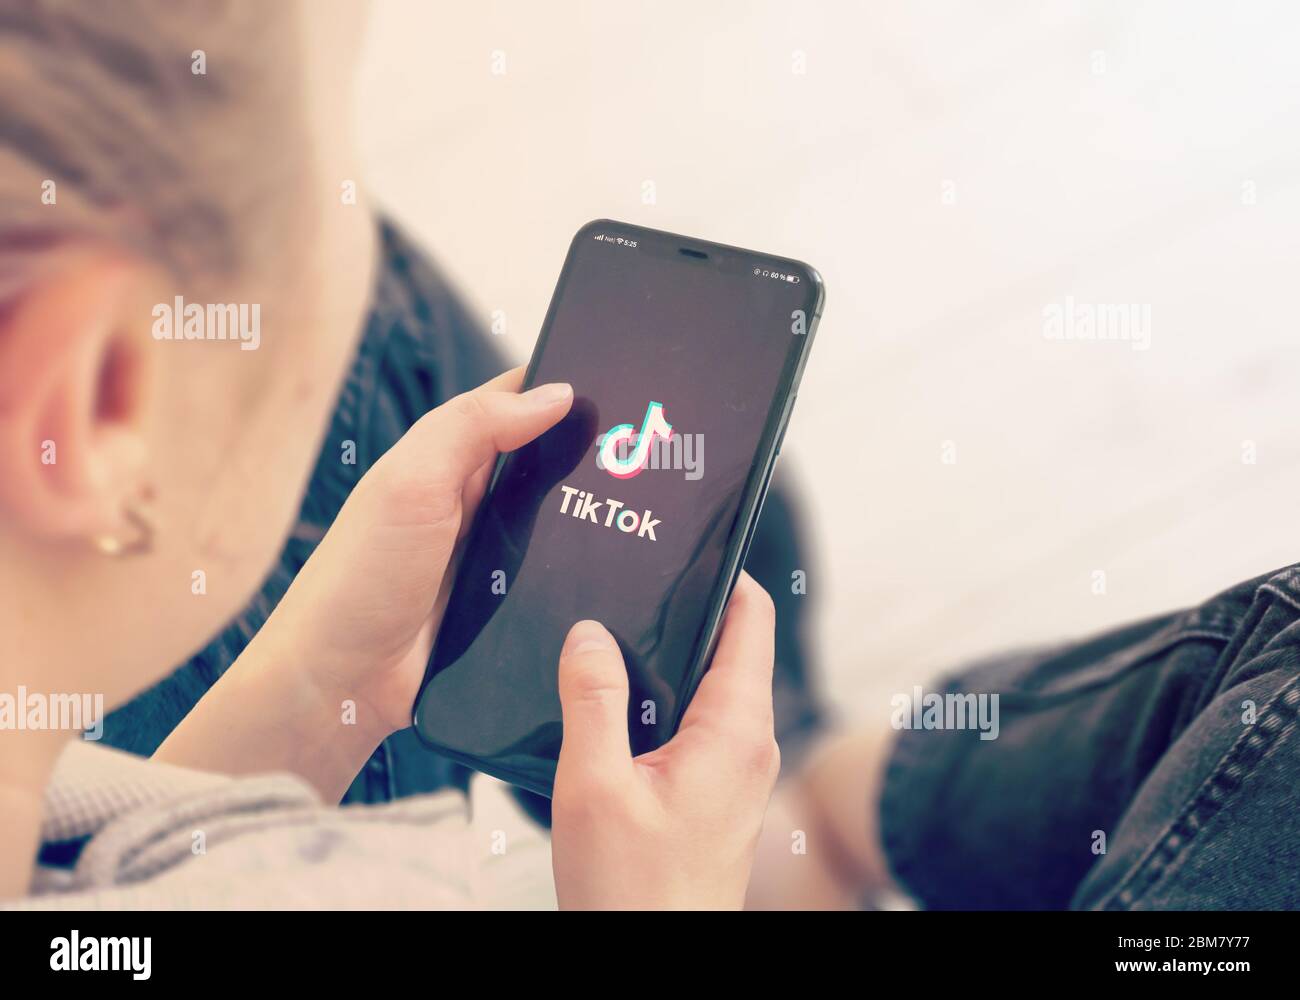 KYIV, UKRAINE-JANUARY, 2020: Tiktok on Smart Phone Screen. Young Girl Pointing or Texting Tiktok on Smart Phone During a Pandemic Self-Isolation and Coronavirus Prevention. Stock Photo